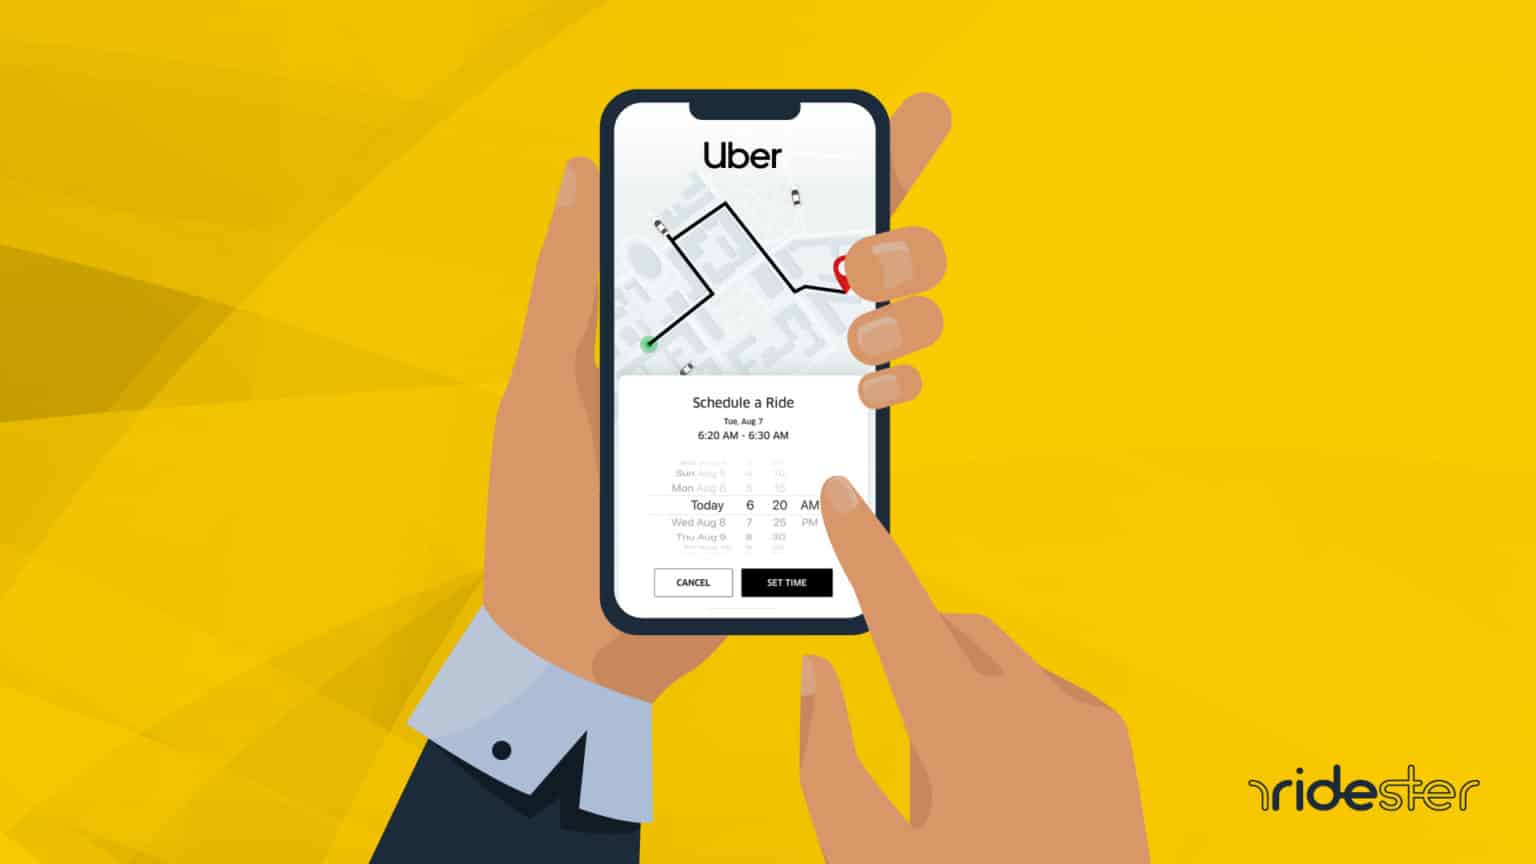 How To Schedule Uber Rides In Advance | Ridester.com